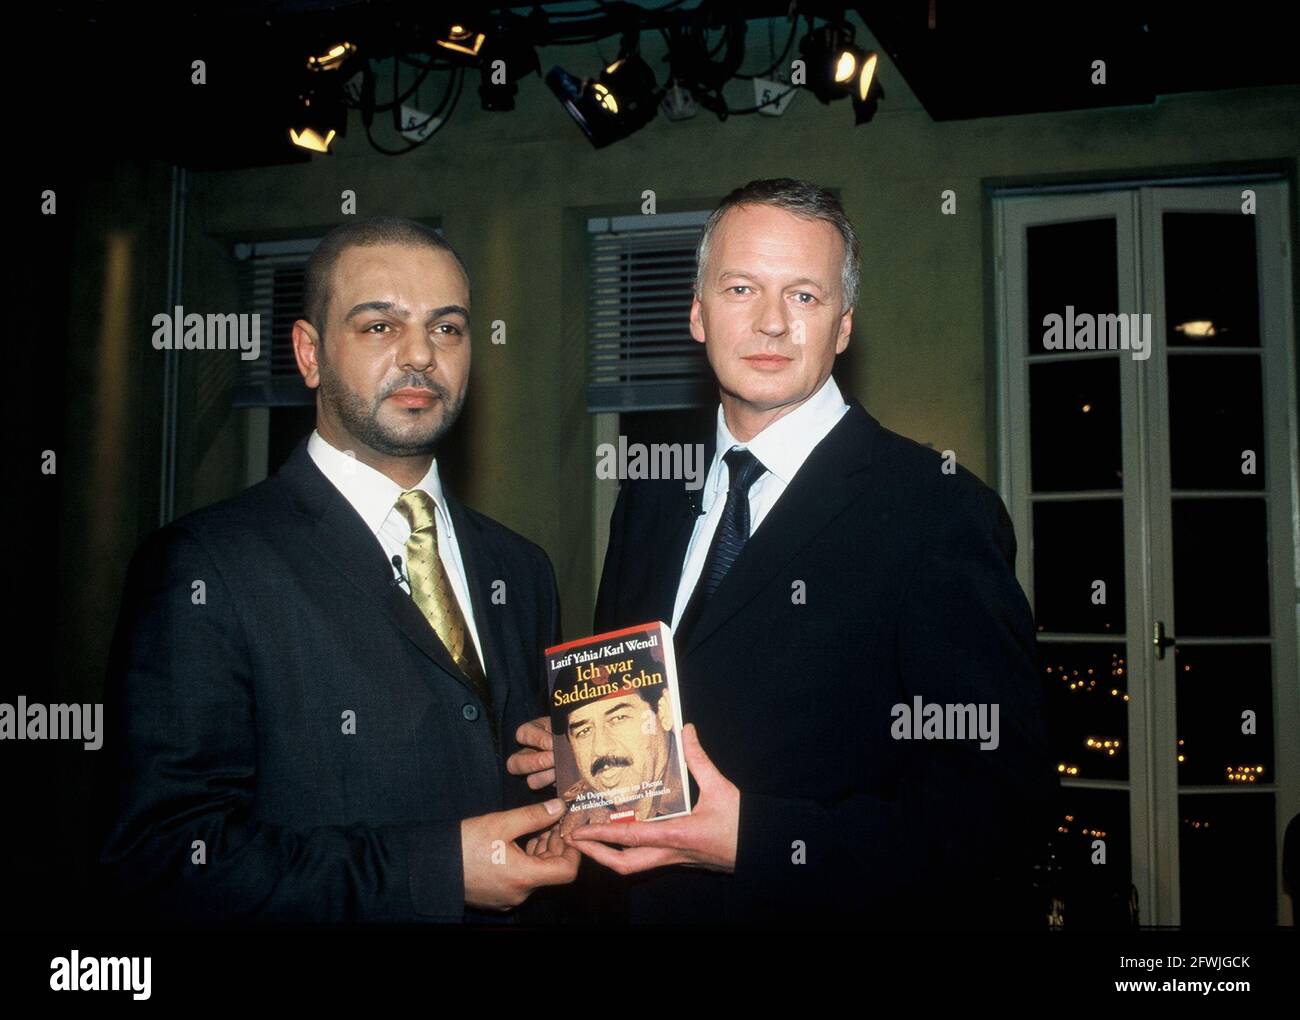 Cologne, Germany. 11th Feb, 2003. Latif YAHIA, from 1986 to 1991 FIDAL - double-ganger, bodyguard and body-owner - of UDAI HUSSEIN the eldest son of the Iraqi dictator Sadam Hussein Karl WENDL, editor-in-chief of NEWS, l-r, 11 February 2003 Photo : Horst Galuschka Credit: Horst Galuschka/dpa/Horst Galuschka dpa/Alamy Live News Stock Photo